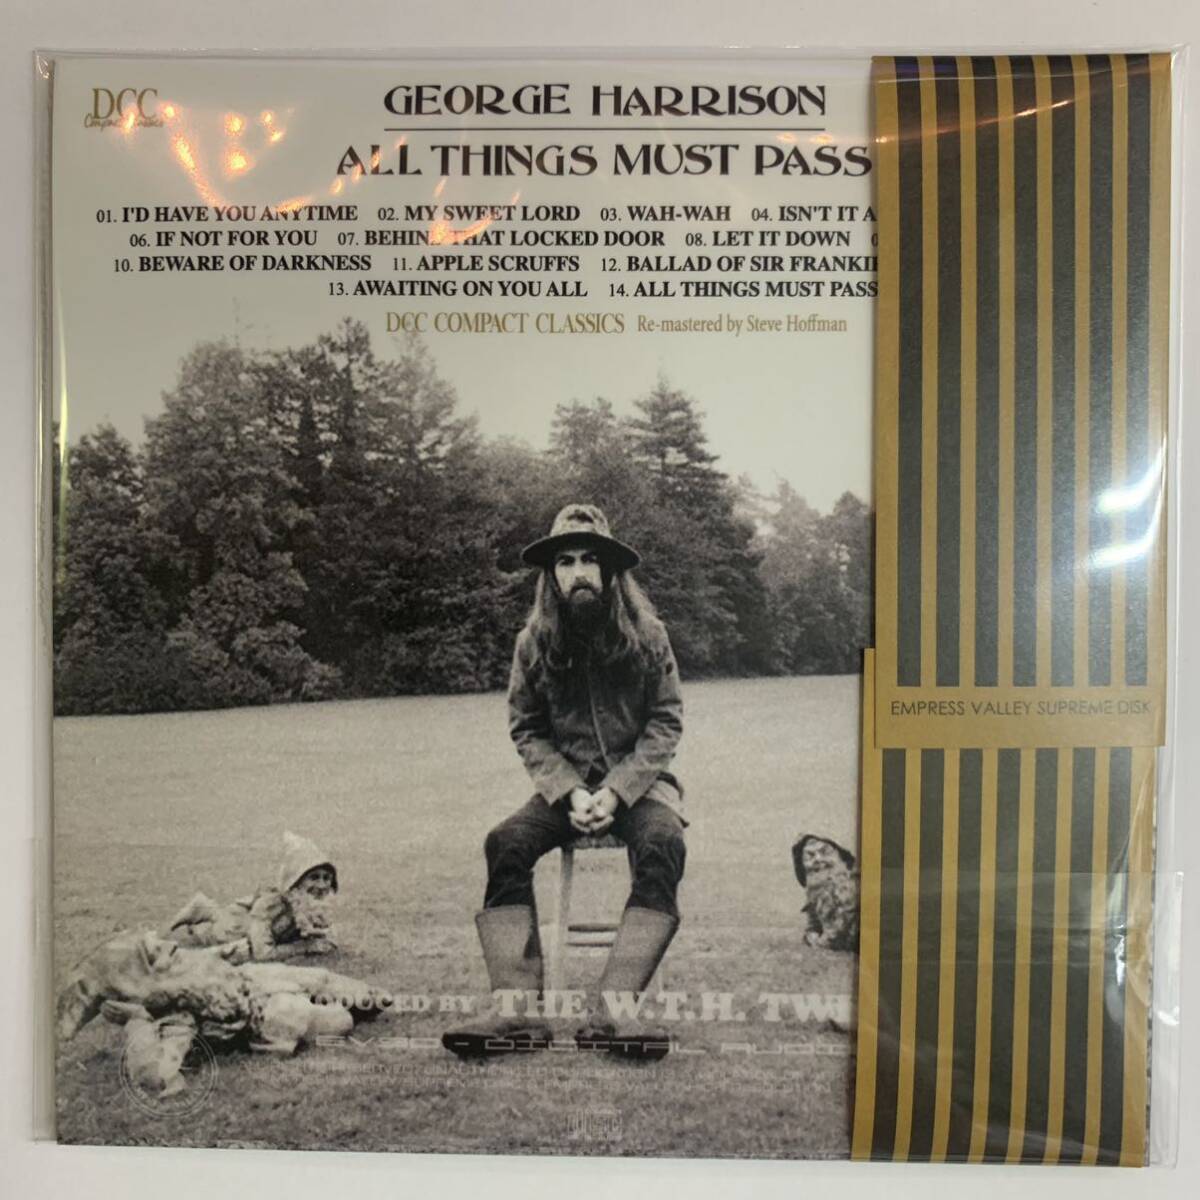 GEORGE HARRISON / ALL THINGS MUST PASS DCC COMPACT CLASSICS Remastered by Steve Hoffman (CD) 「帯付き紙ジャケット仕様限定盤」の画像4